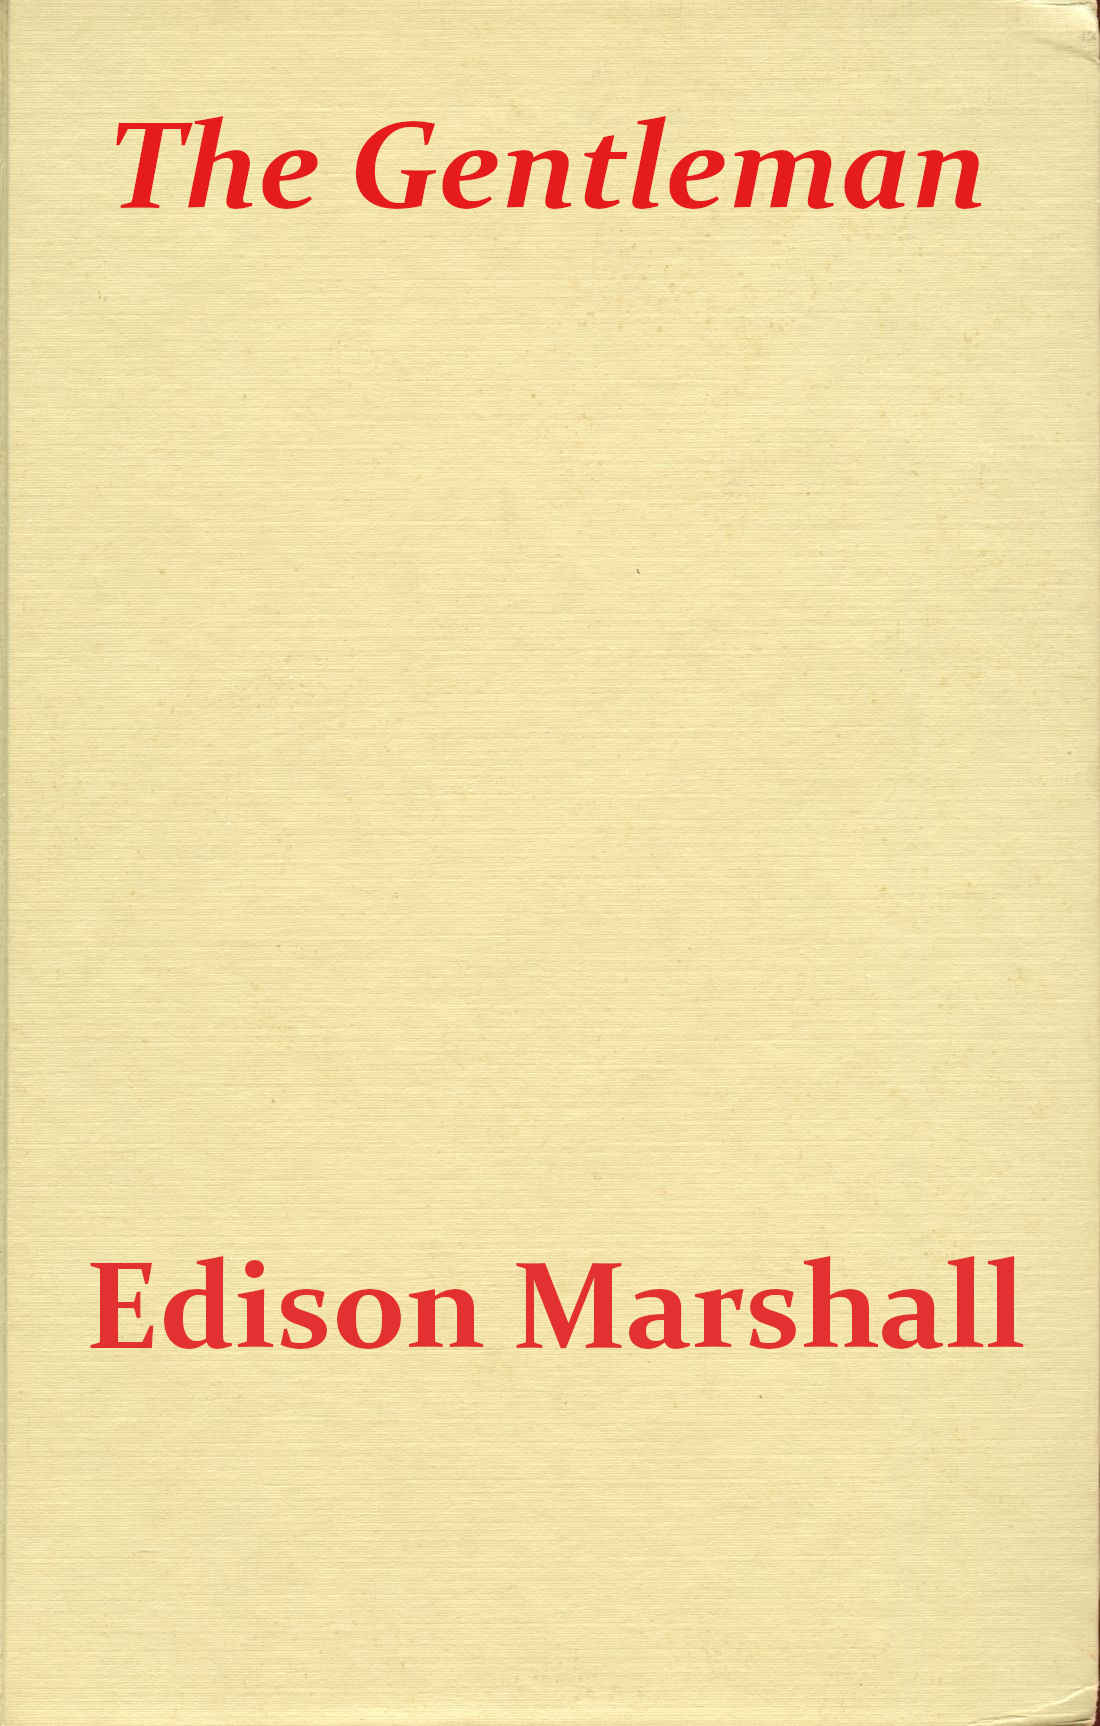 The Distributed Proofreaders Canada eBook of The Gentleman by Edison Marshall